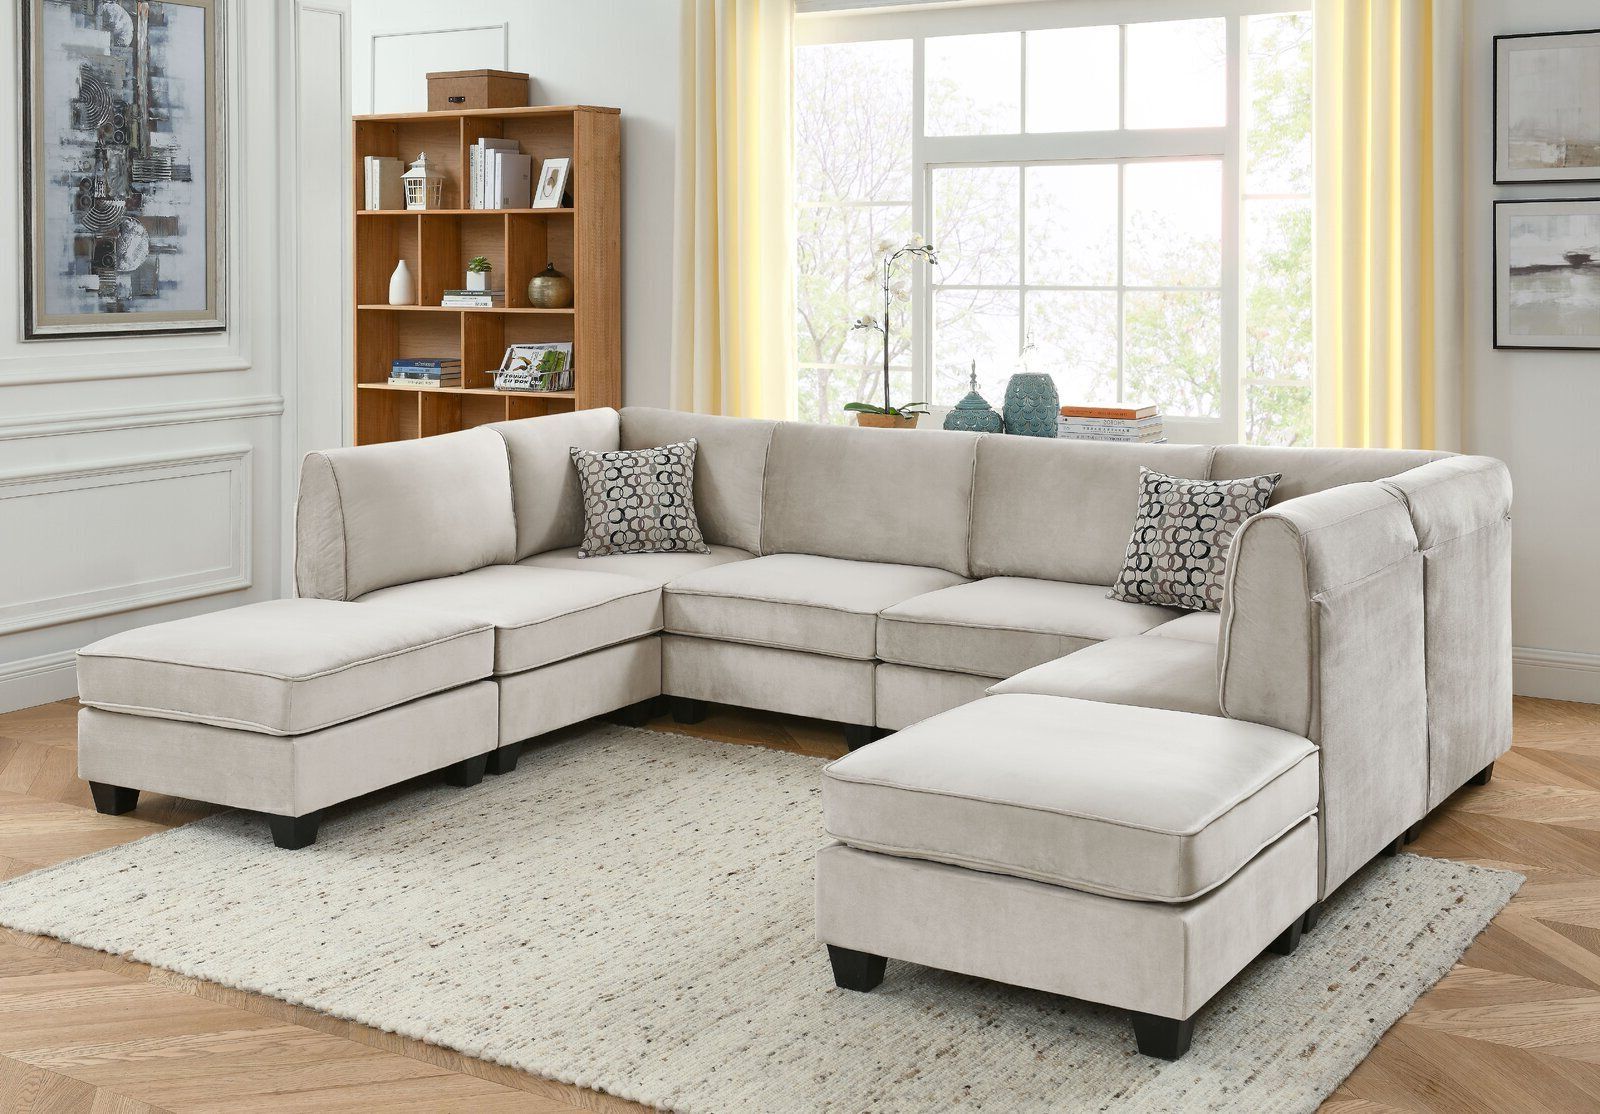 Sectional Sofa With Ottoman – Ideas On Foter Throughout Sectional Sofas With Ottomans And Tufted Back Cushion (View 7 of 20)